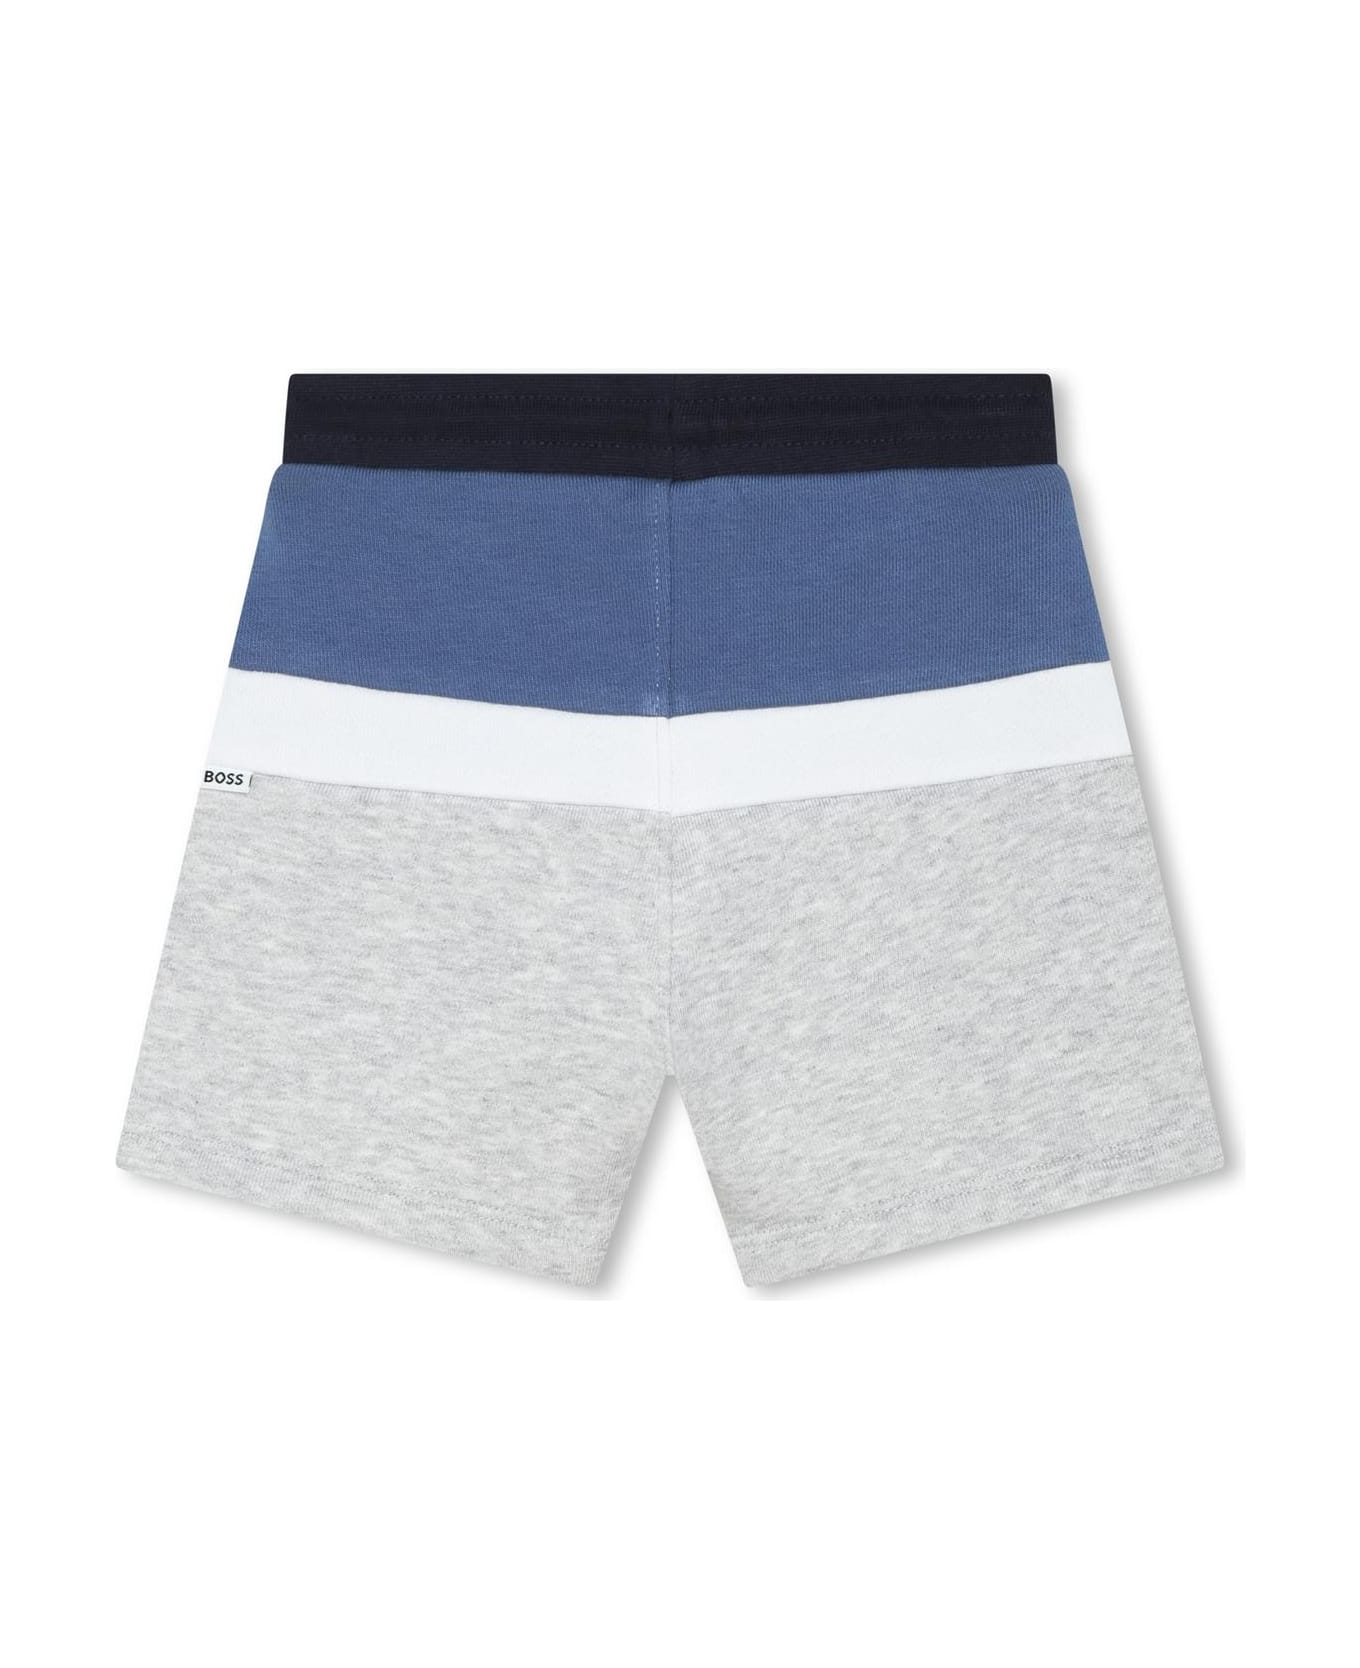 Hugo Boss Shorts With Color-block Design - Gray